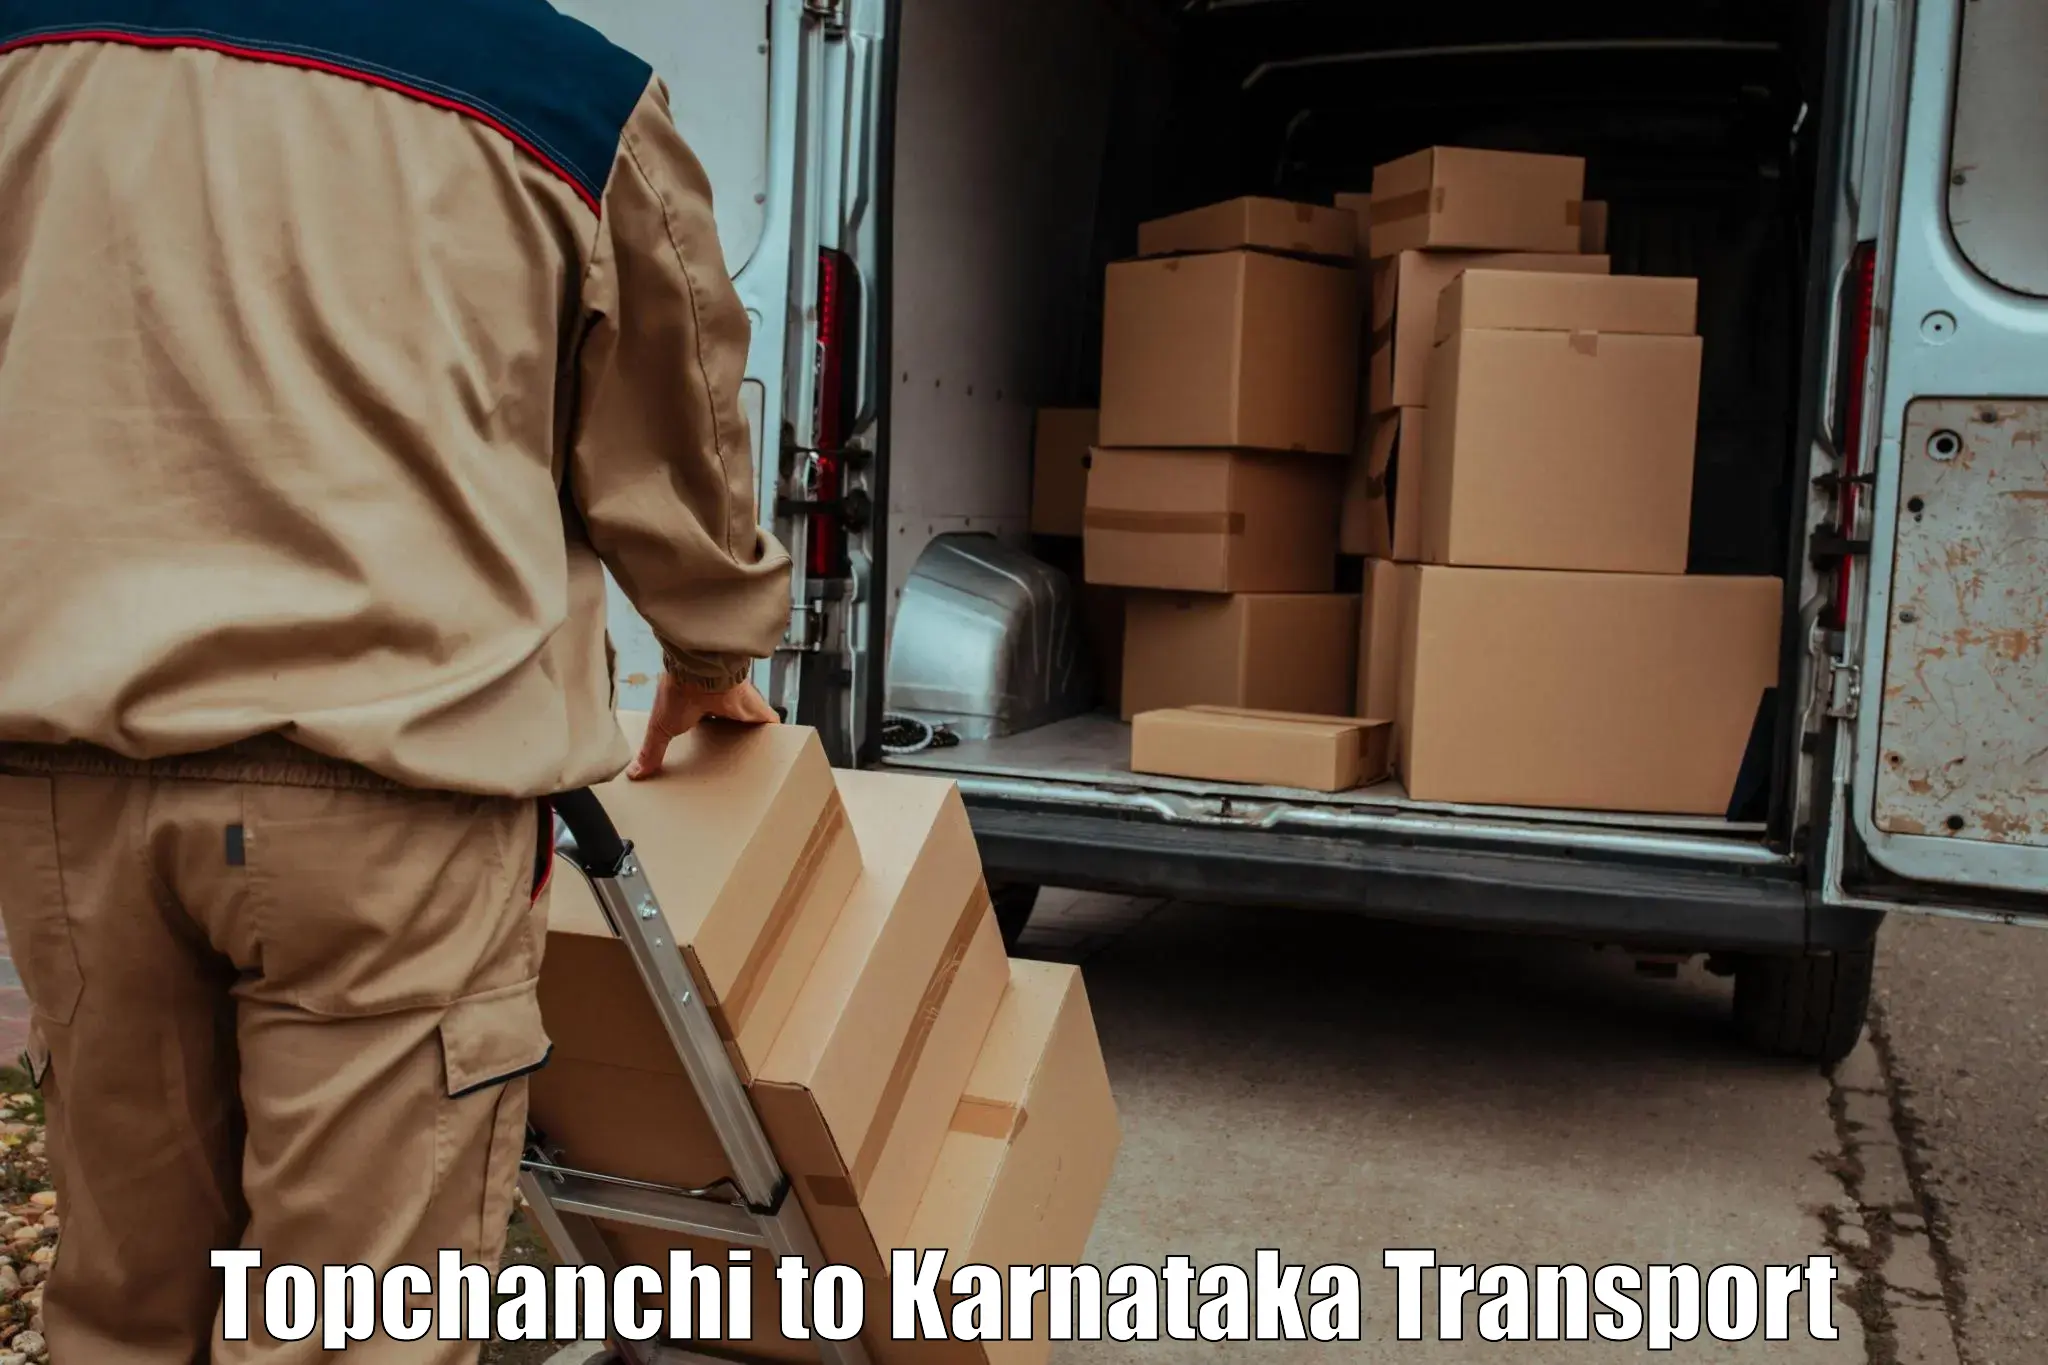 Commercial transport service Topchanchi to Athani